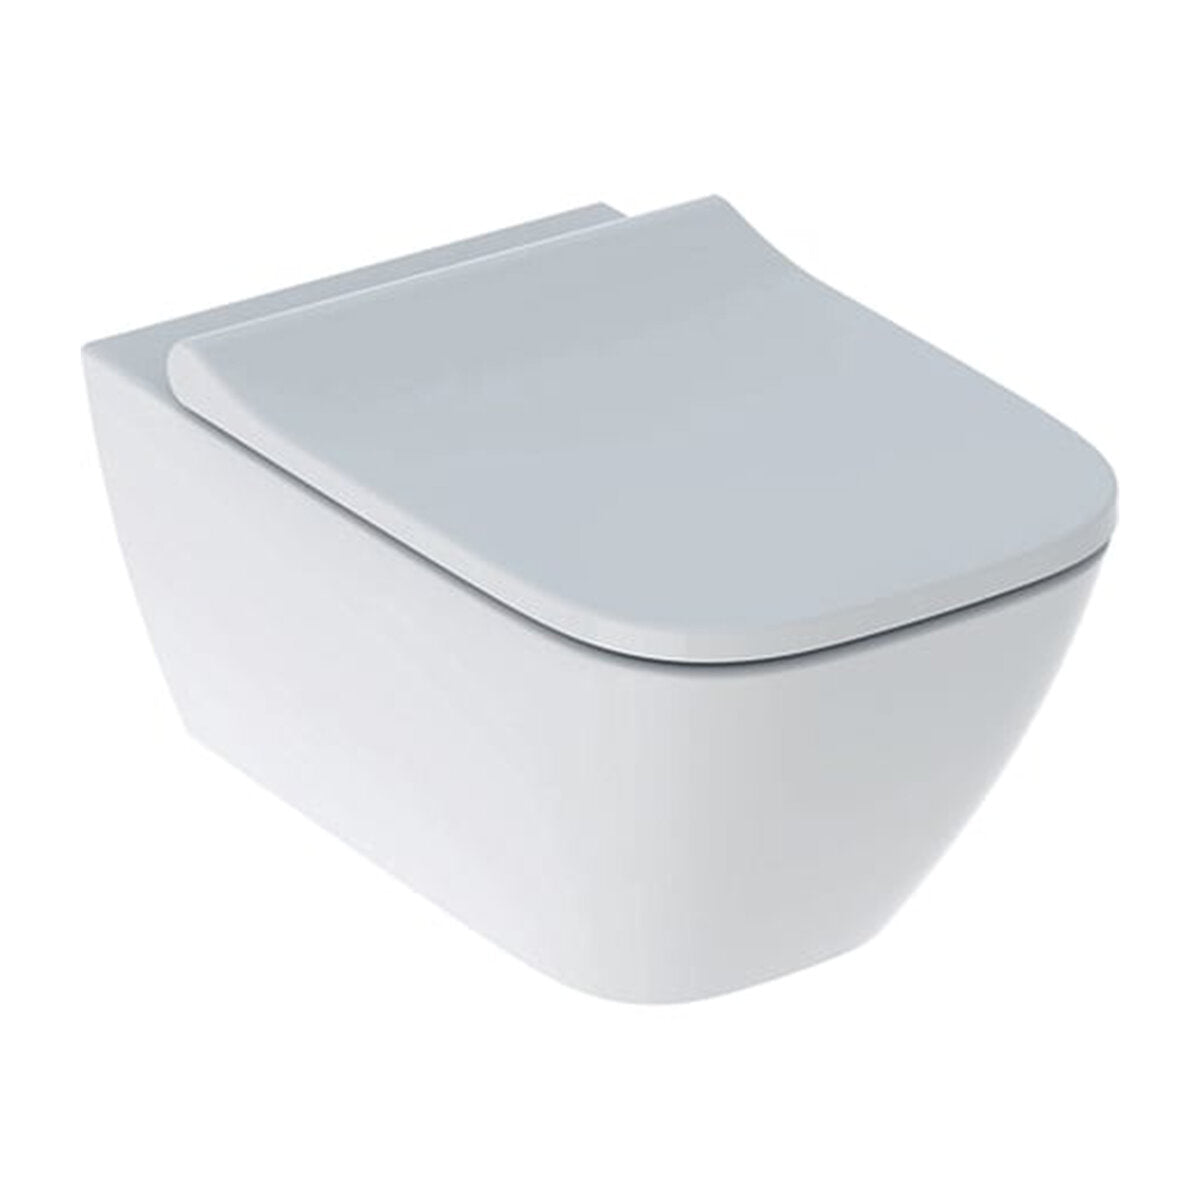 Geberit Smyle rimfree wall hung wc with seat